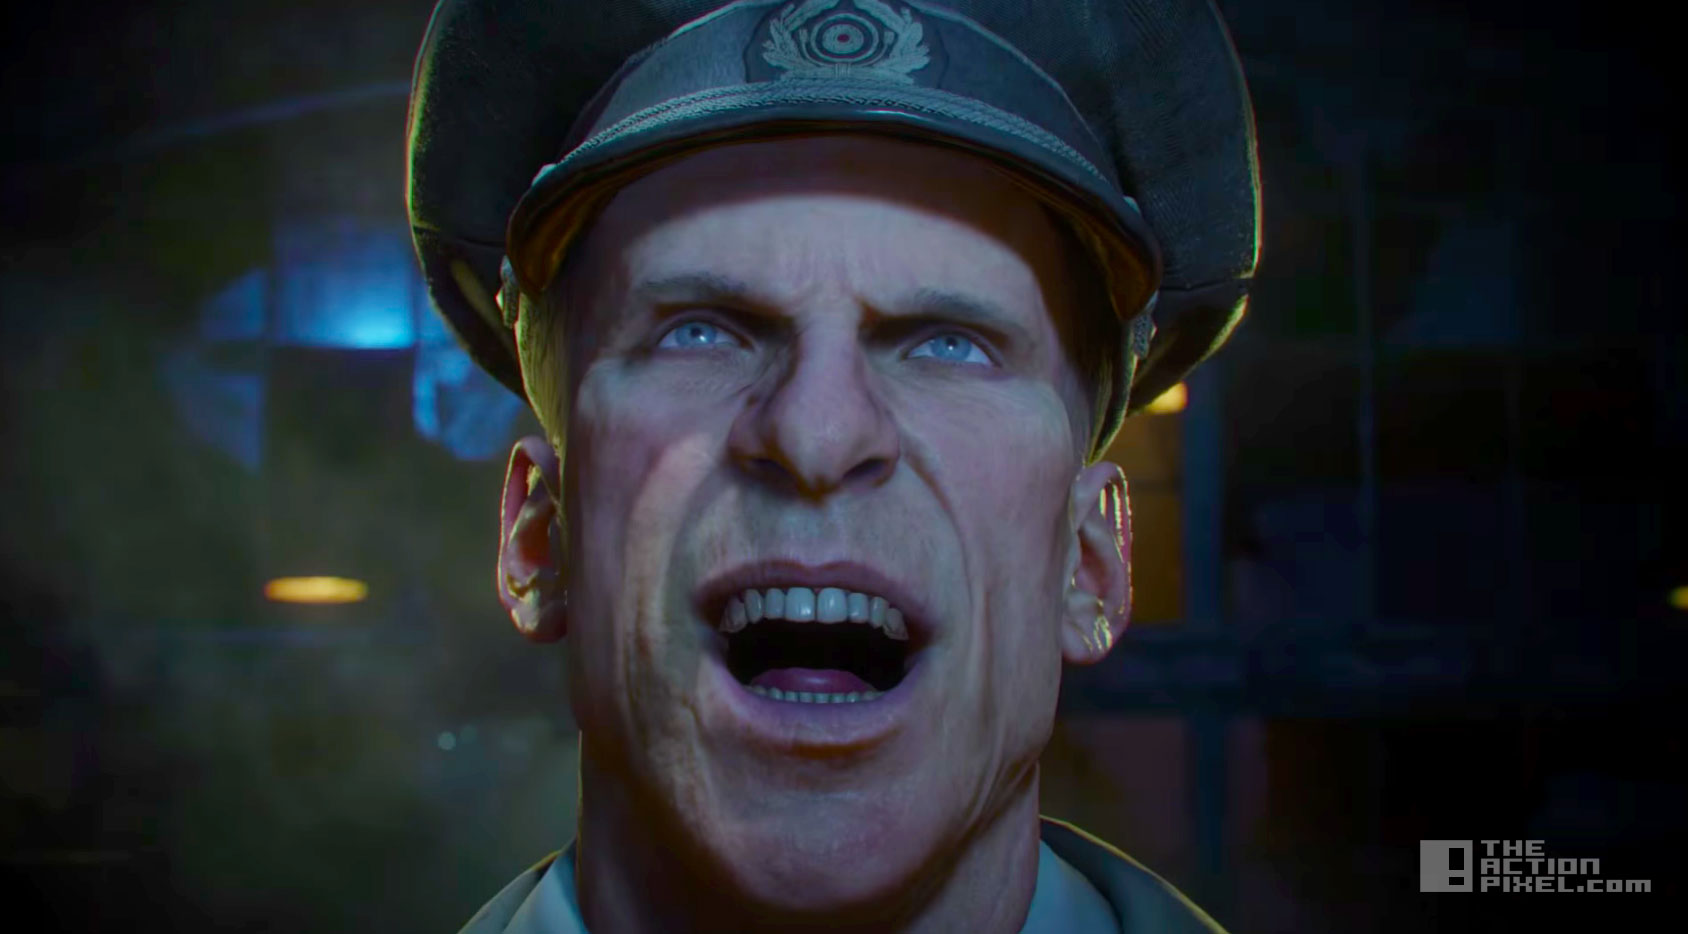 Call Of Duty Black Ops 3 Zombies Presents New Trailer For “the Giant